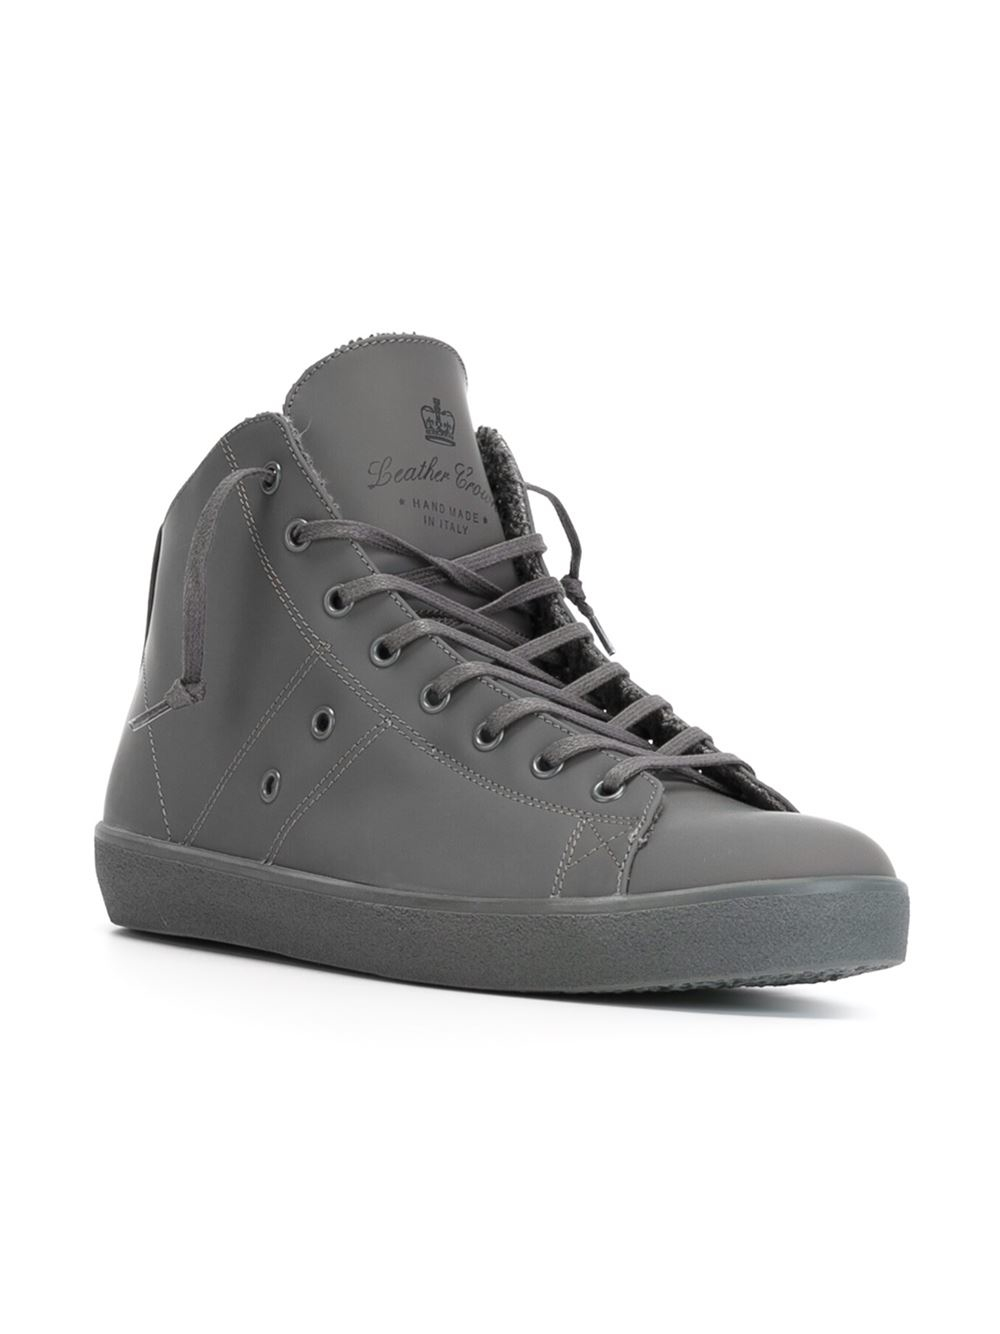 Lyst - Leather Crown Classic Hi-top Sneakers in Gray for Men